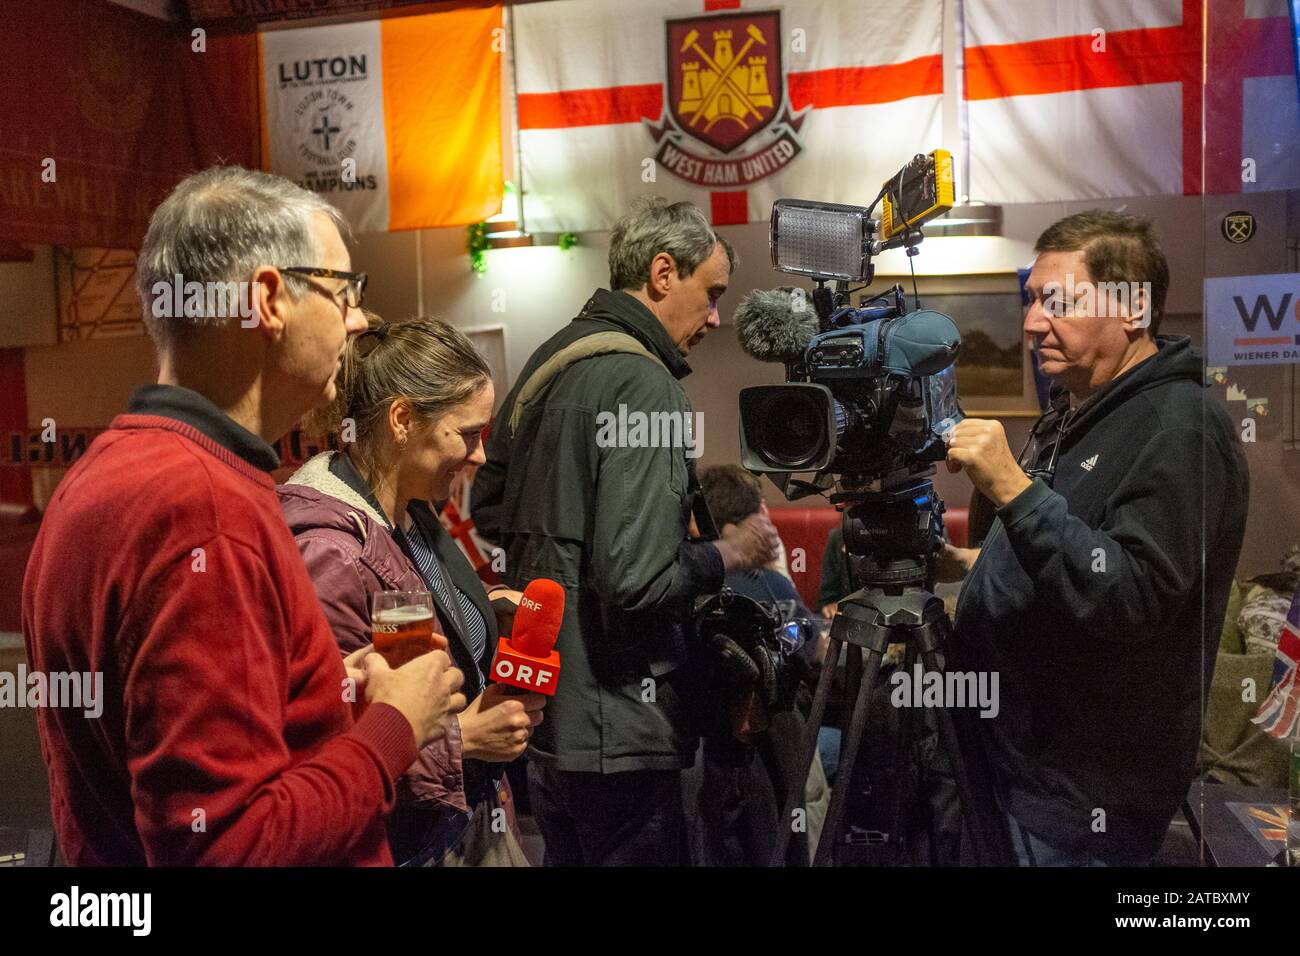 Europeans gather to commemorate Brexit Night, the UKs final day in the EU, in a British pub in Vienna, Austria on 31 January Stock Photo